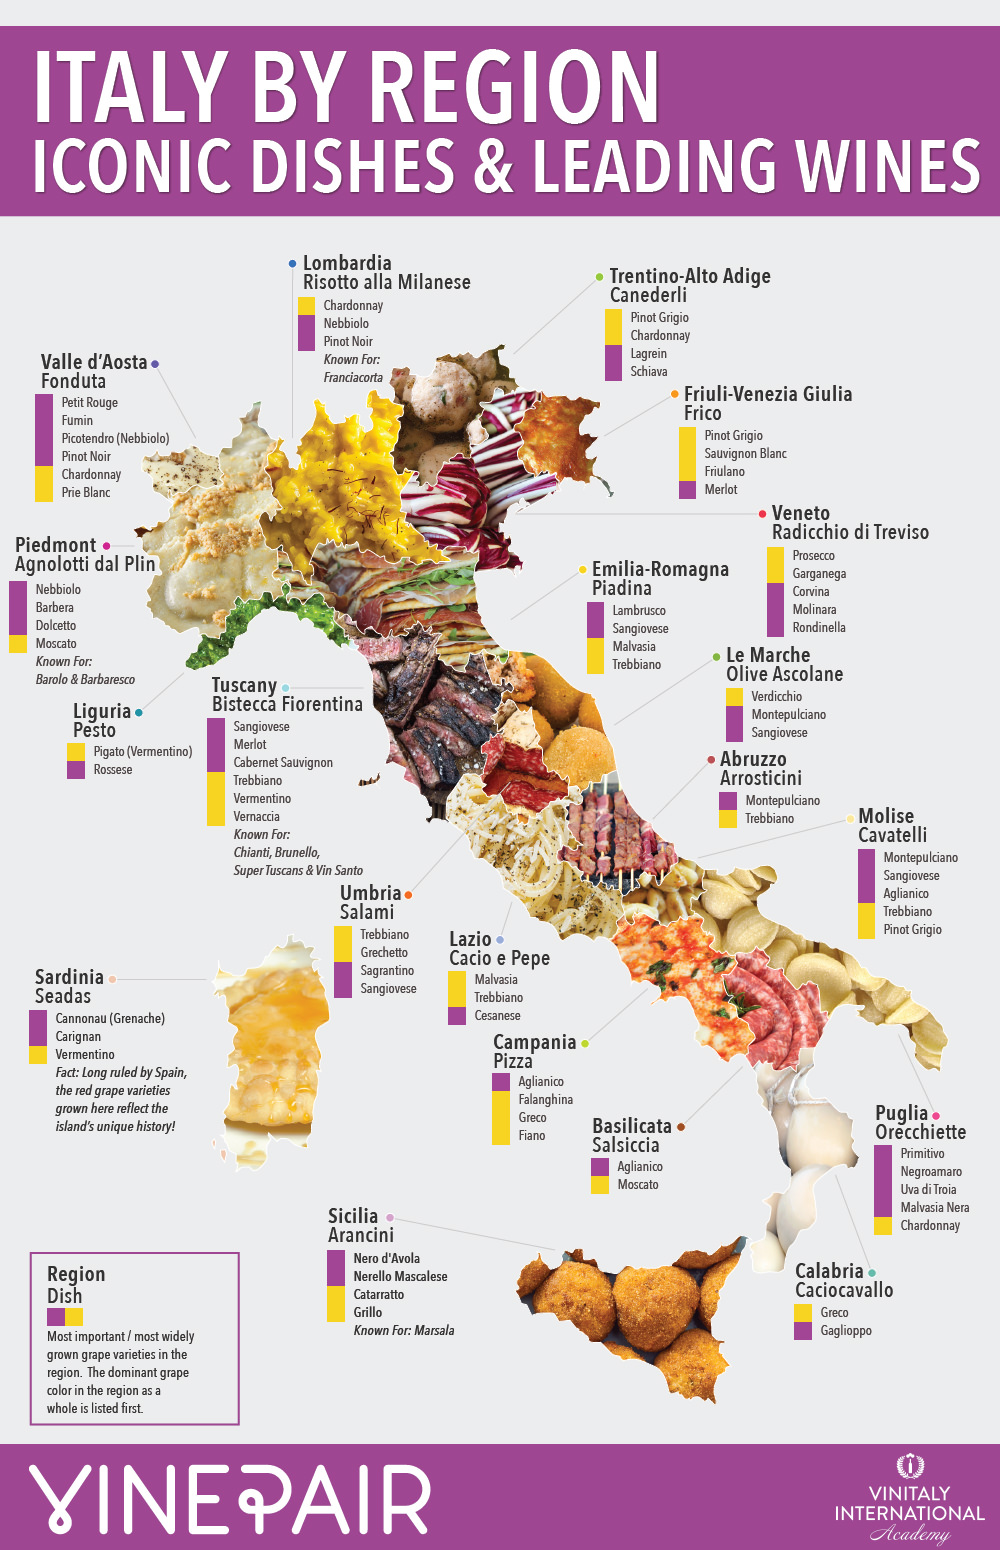 Iconic Foods And Wines For Every Region In Italy